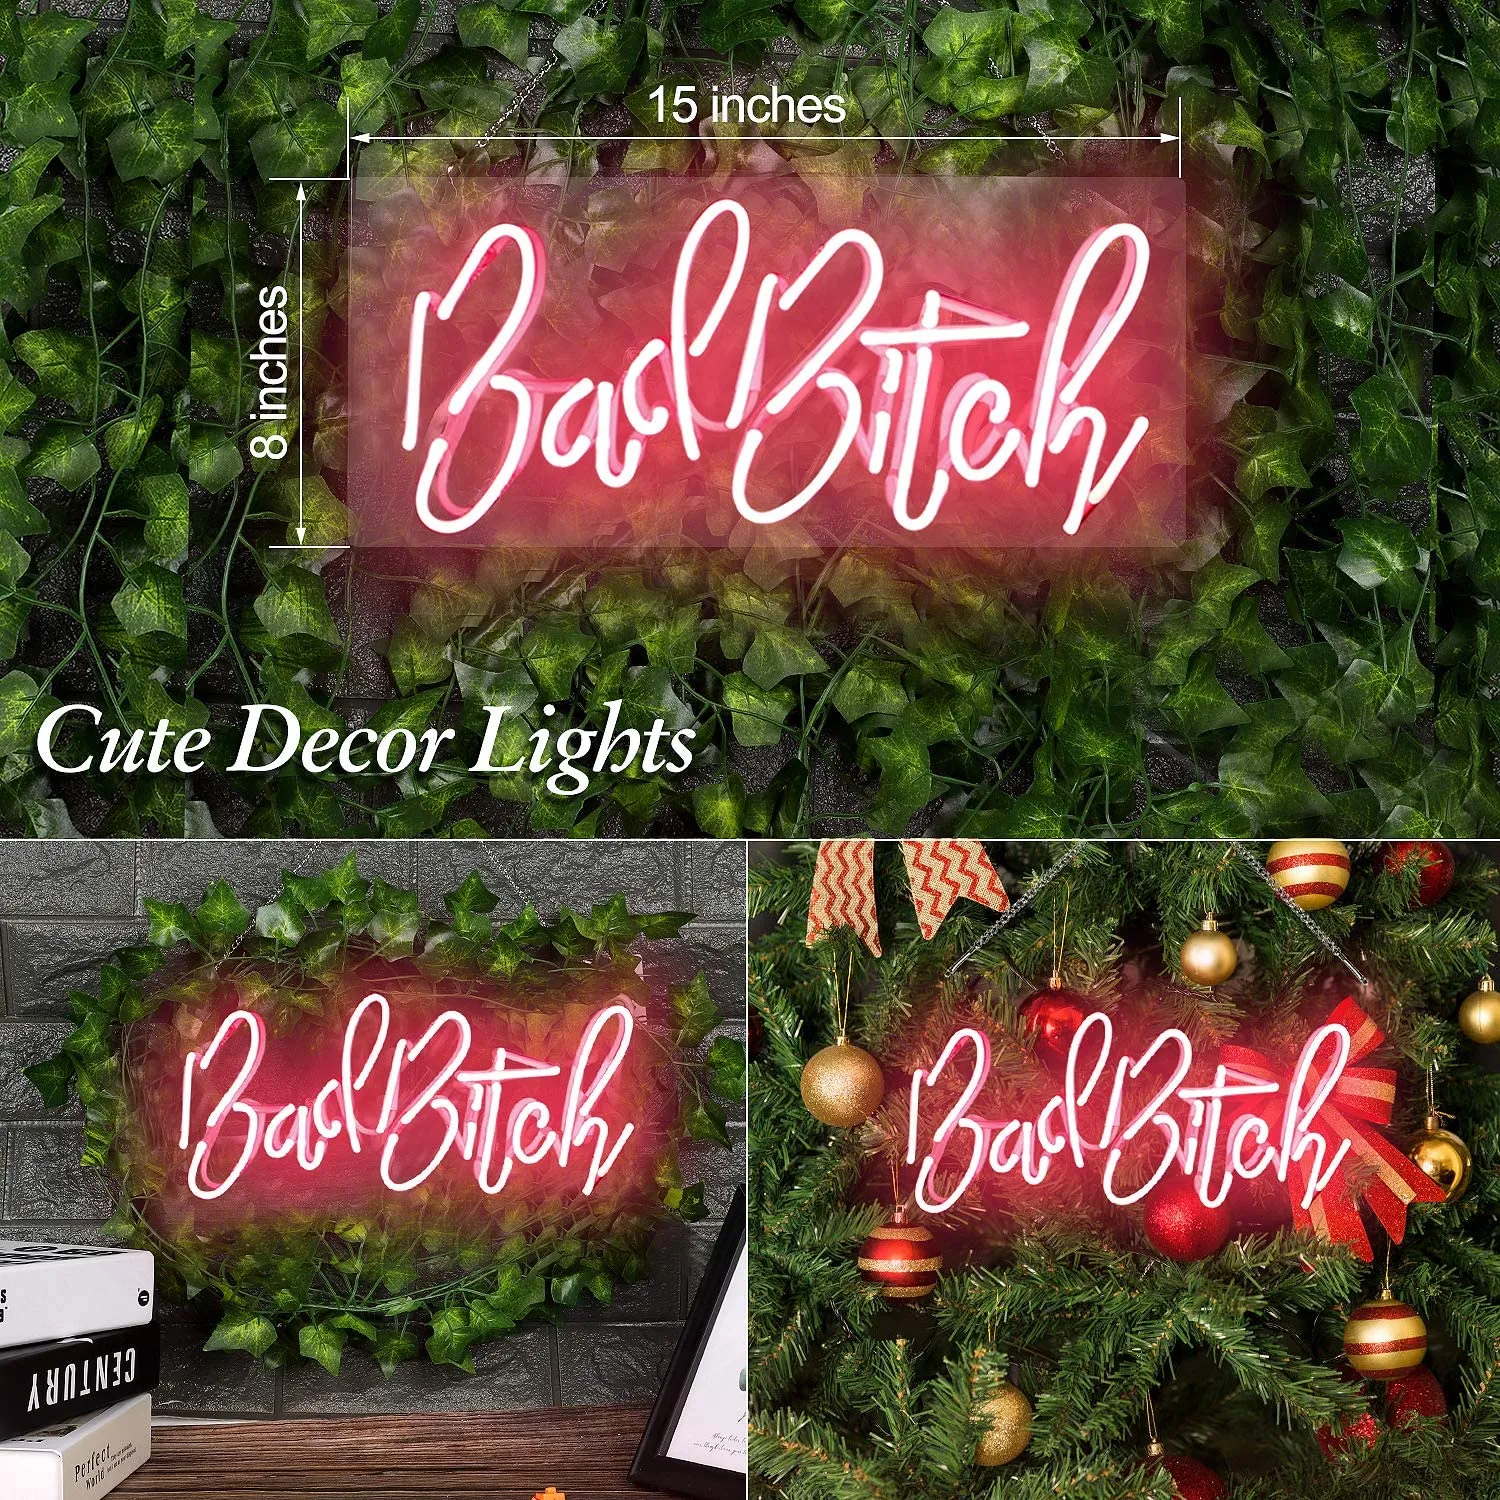 Bad Bitch Real Glass Handmade Neon Wall Signs for Home Light Room Home Bedroom Girls el Beach 15x8 Inches 251R